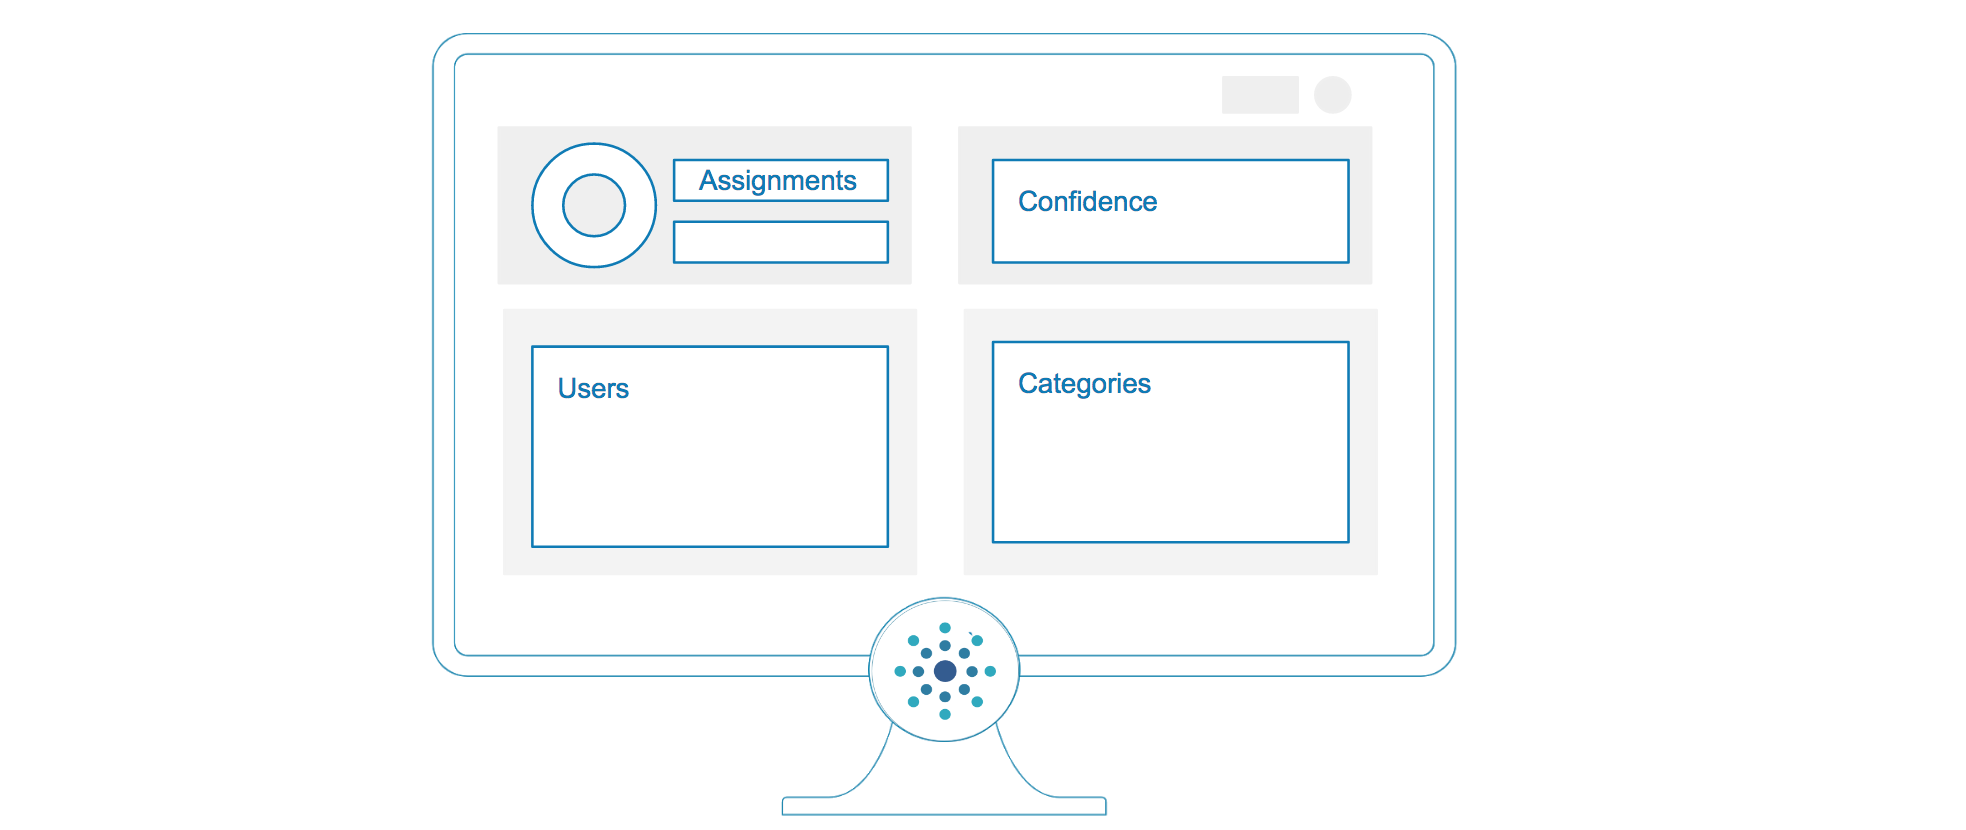 The categorization project dashboard presents important information.